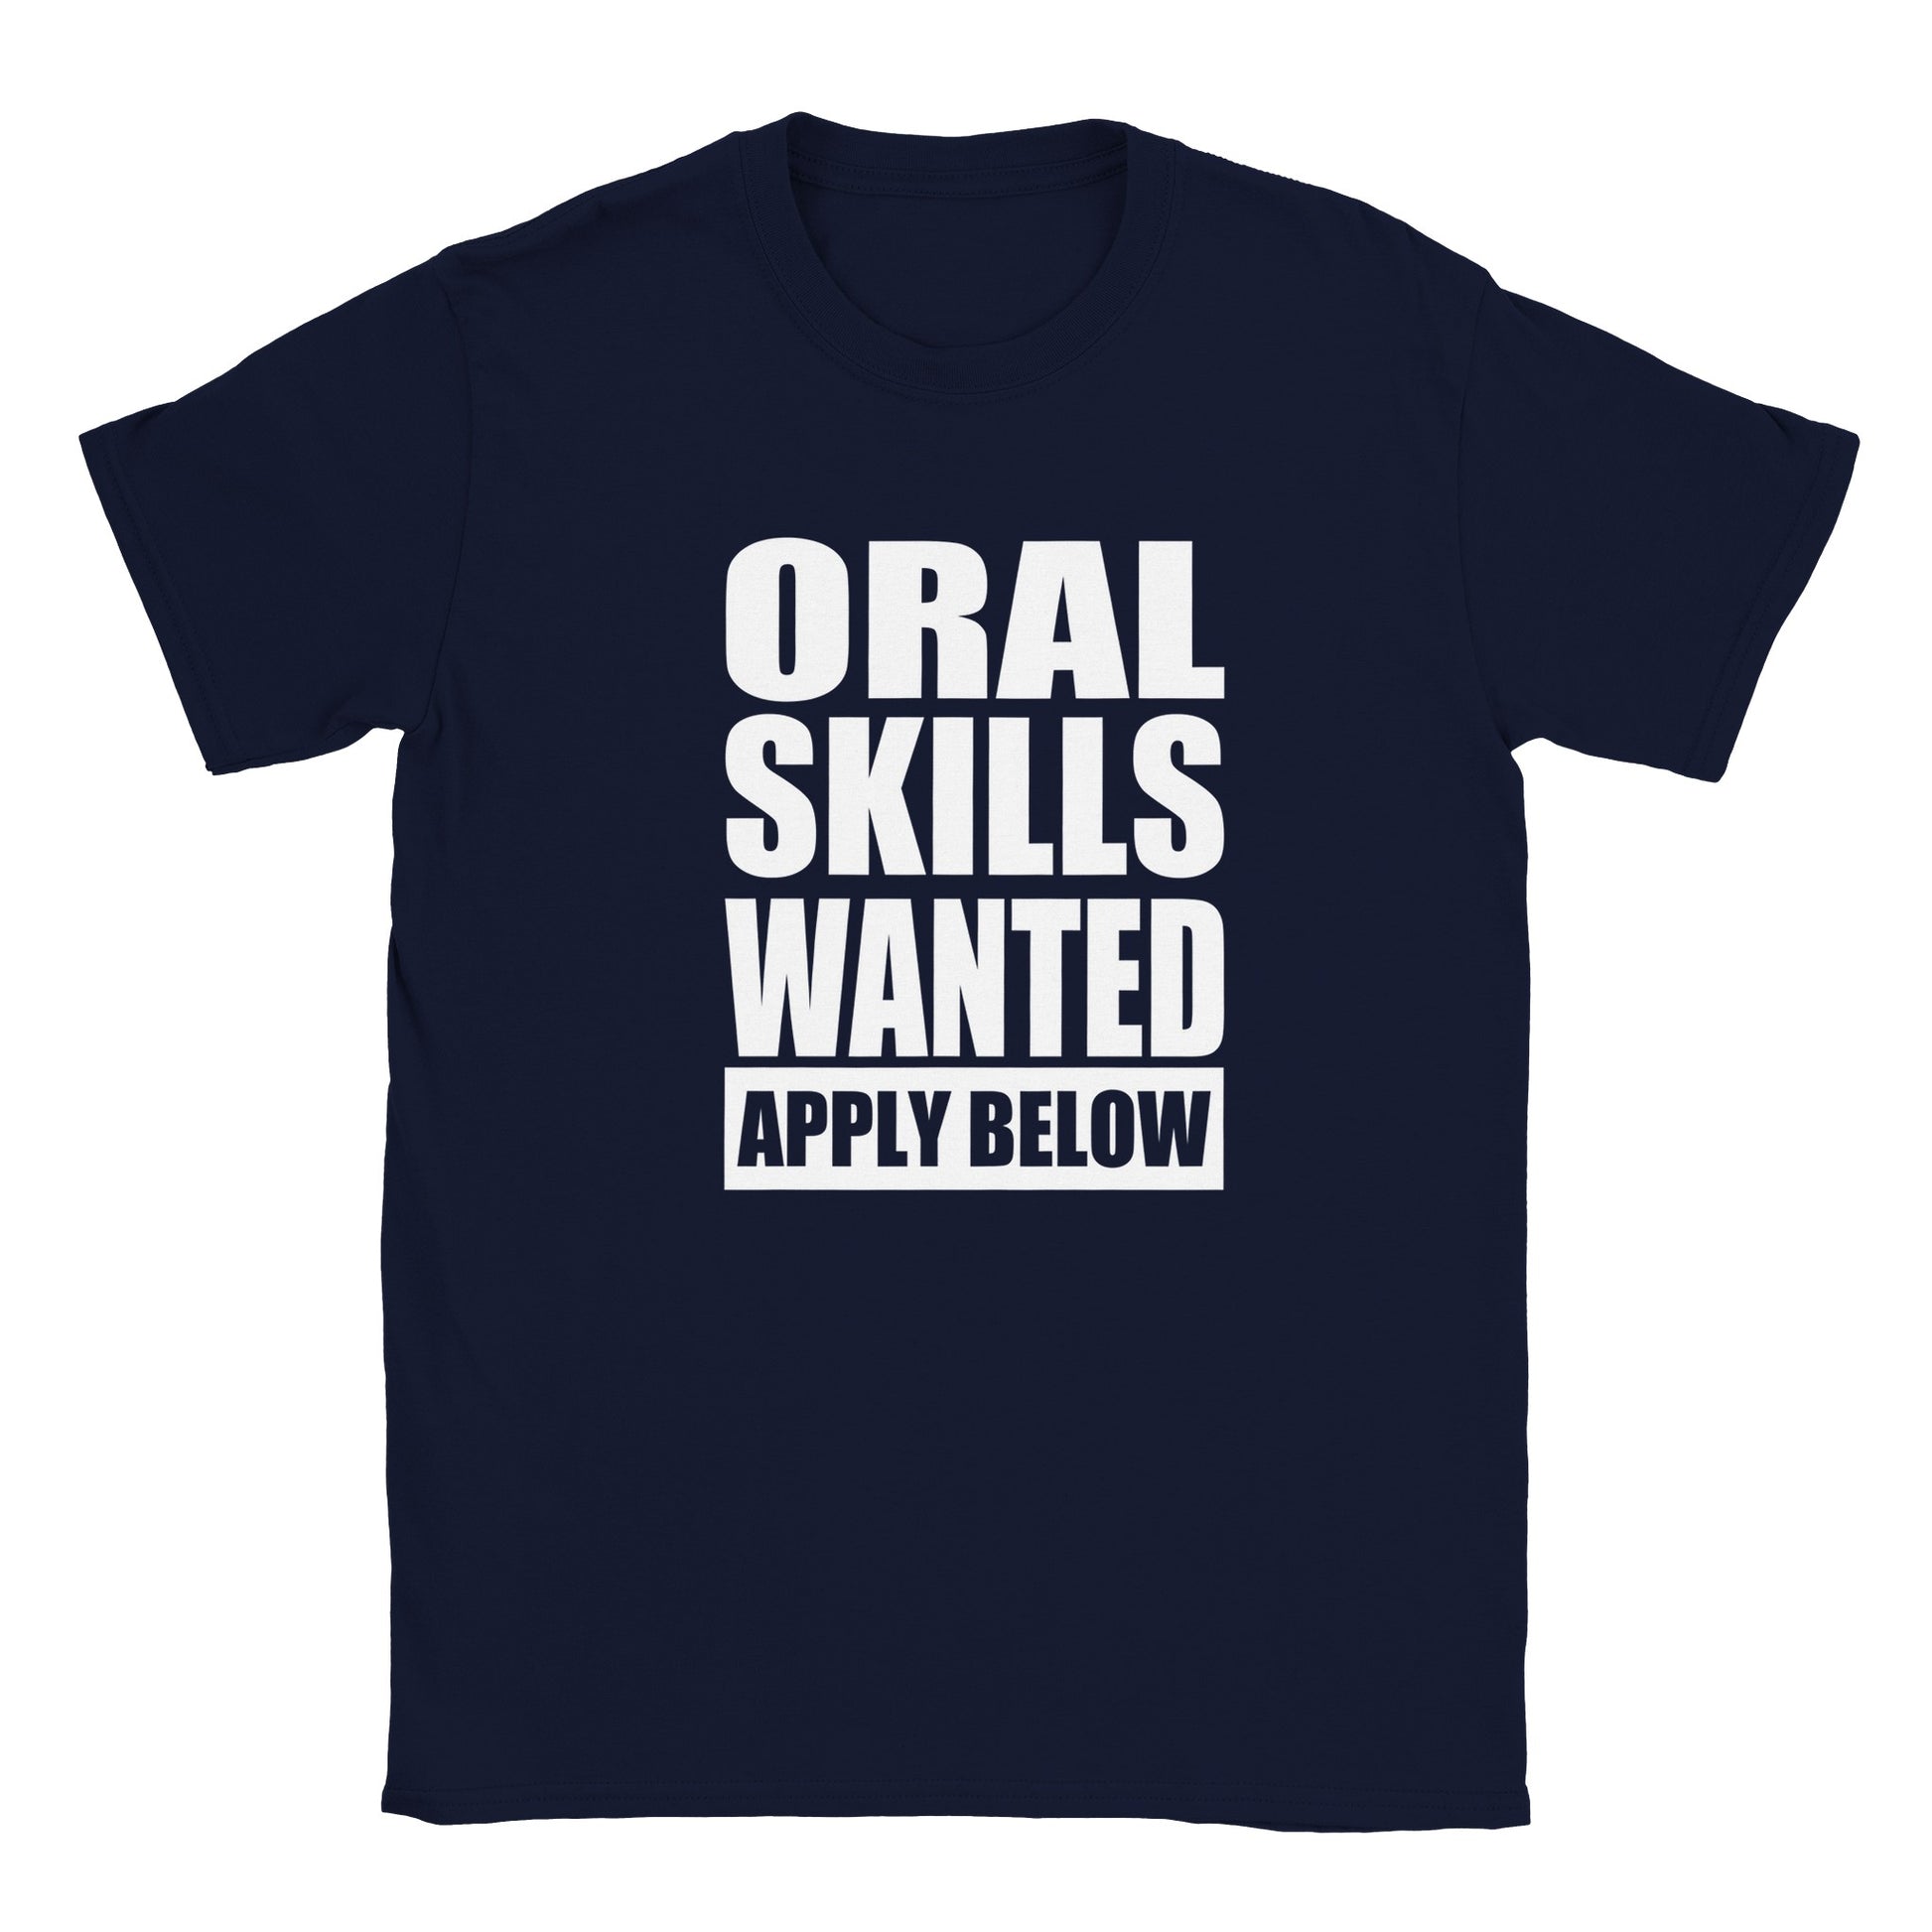 Oral Skills Wanted T-shirt - Mister Snarky's